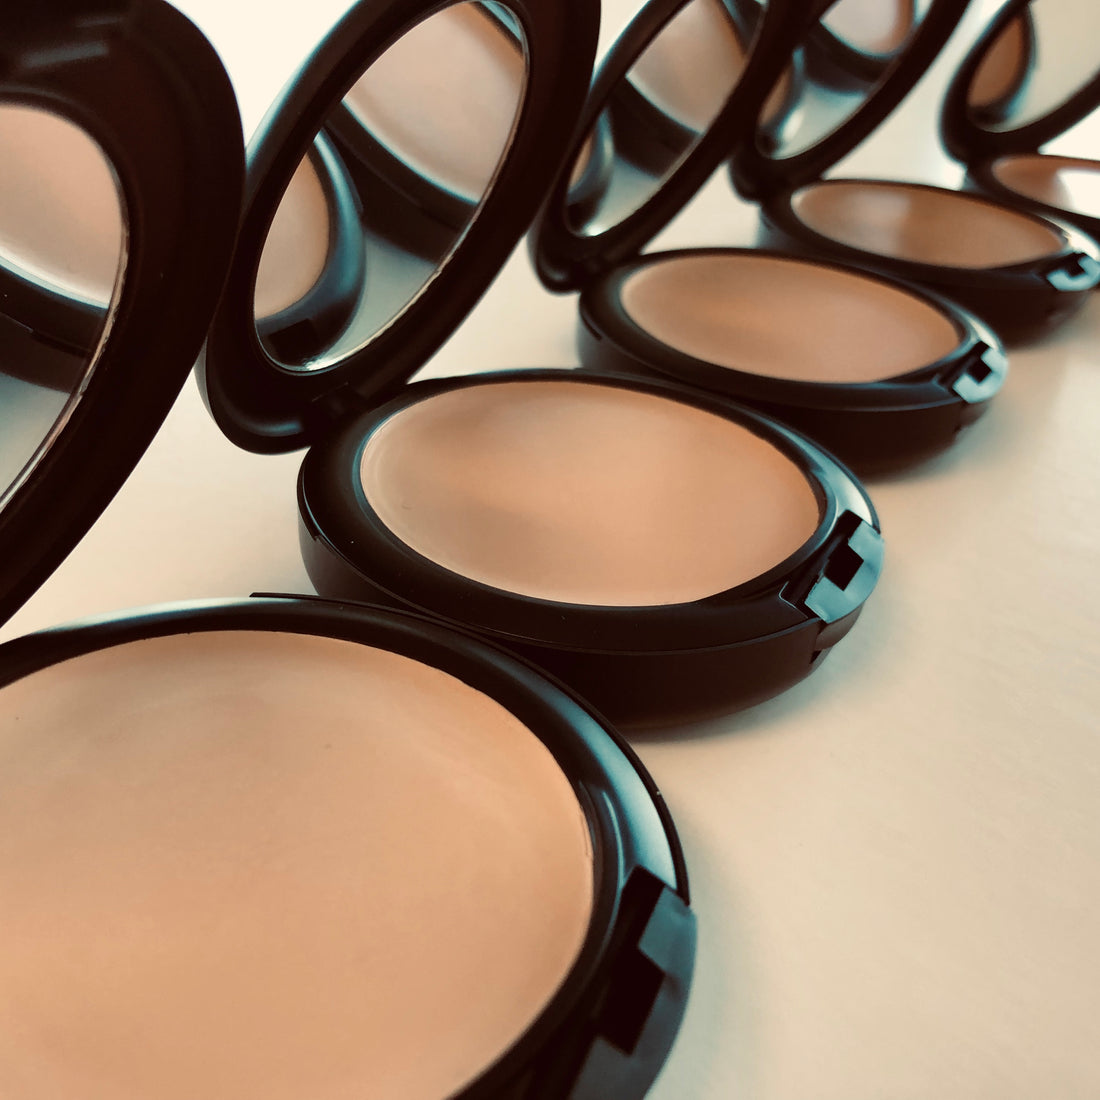 5 reasons to use mineral makeup!